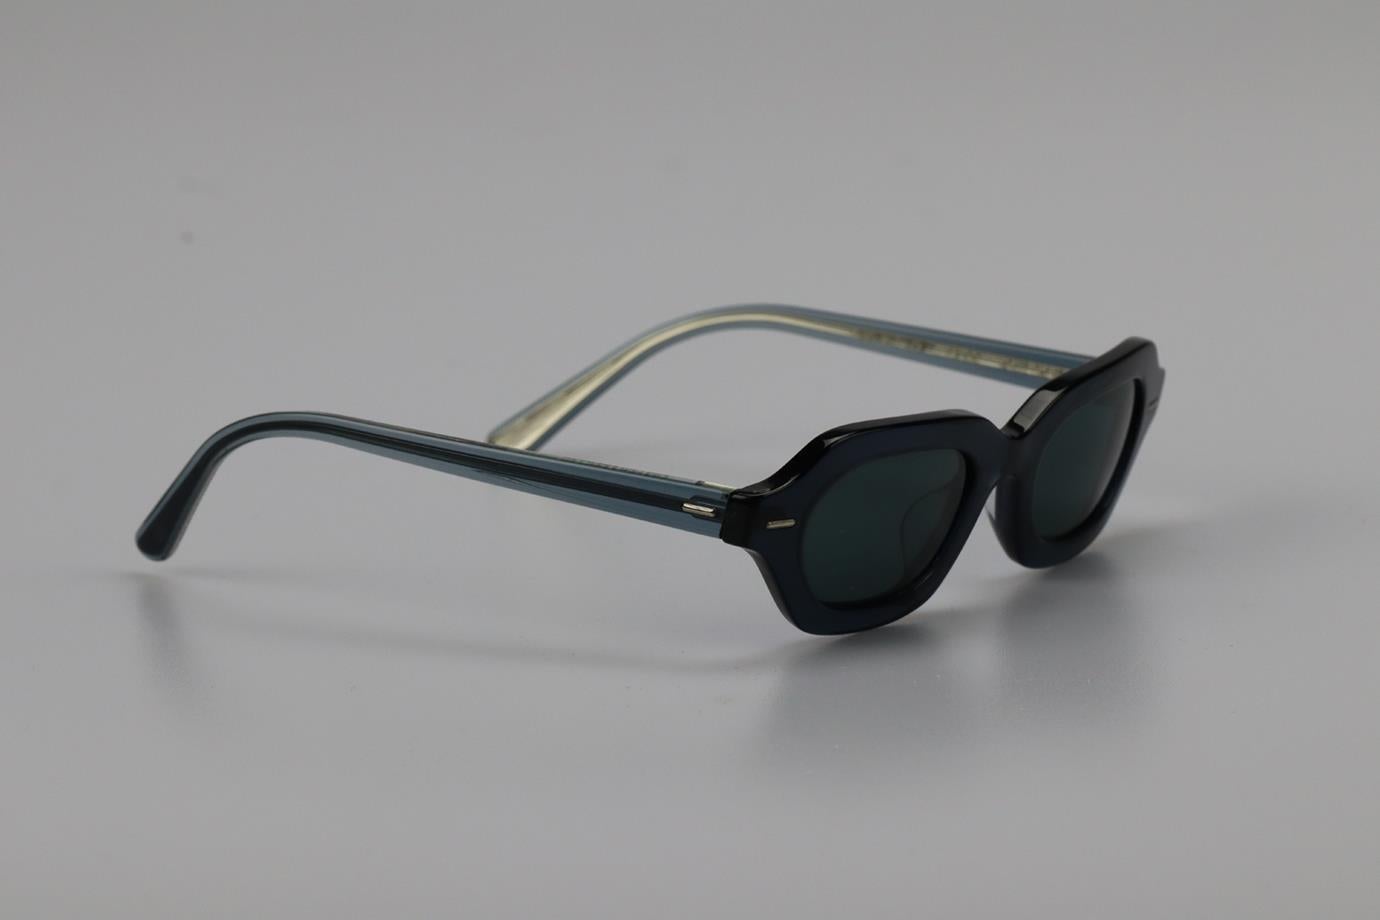 The Row + Oliver Peoples Hexagonal Frame Acetate Sunglasses. Blue. Does not come with - case. Style code: OV5386SU. Lens: 47 mm. Arm: 145 mm. Bridge: 22 mm. Condition: Used. Very good condition - Barely worn. No sign of wear; see pictures
